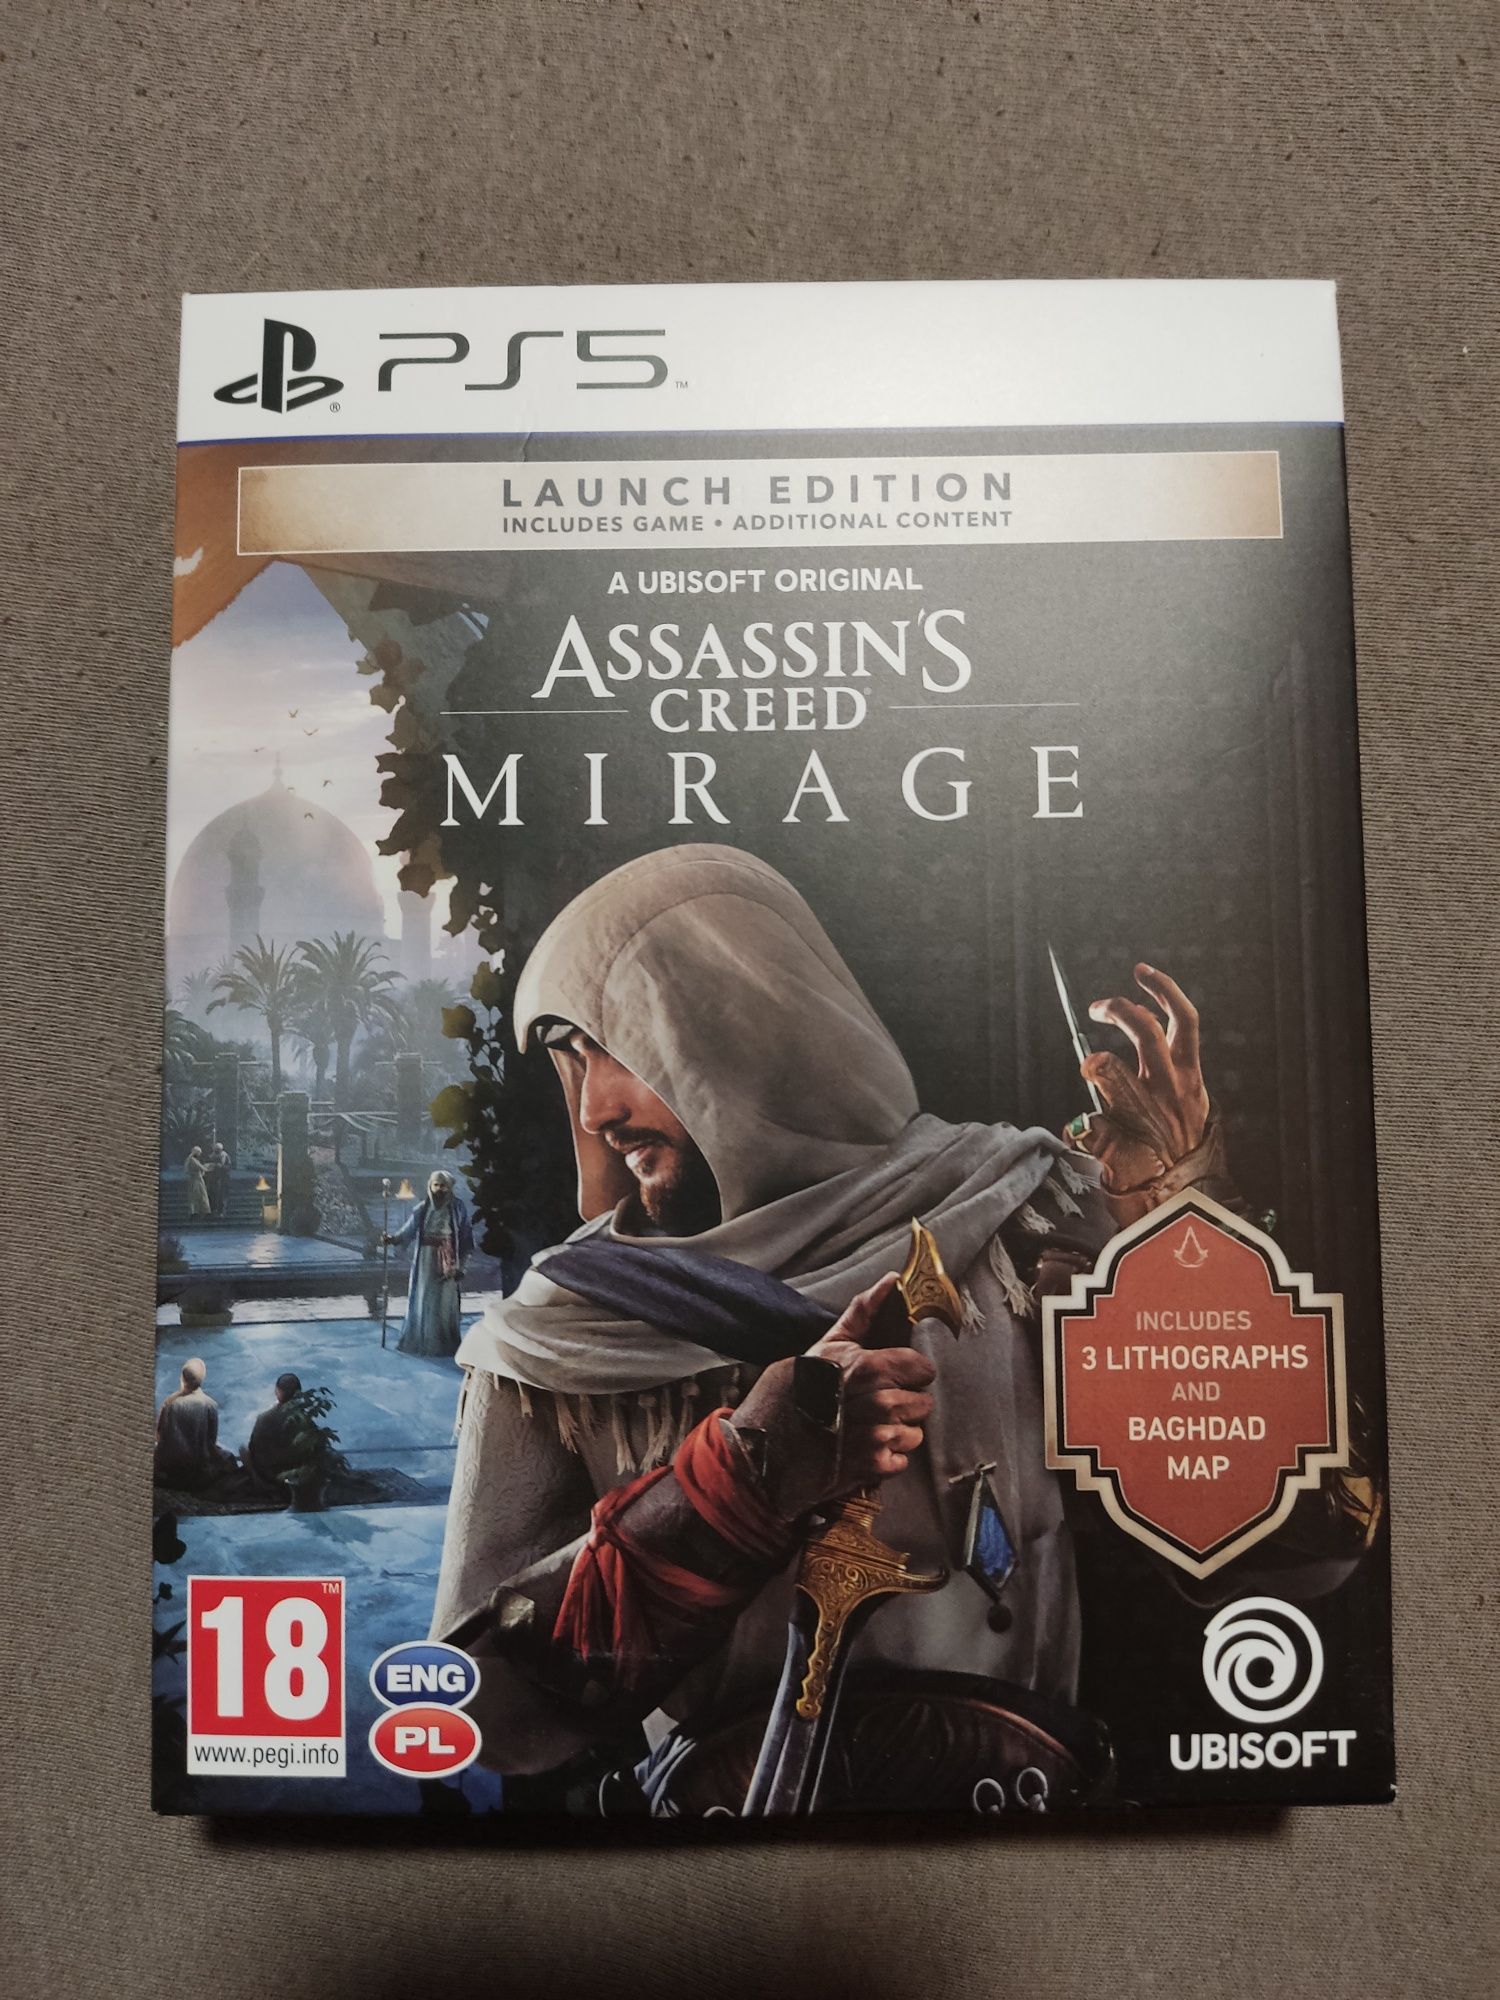 Assassin's creed Mirage - Launch Edition gra PS5